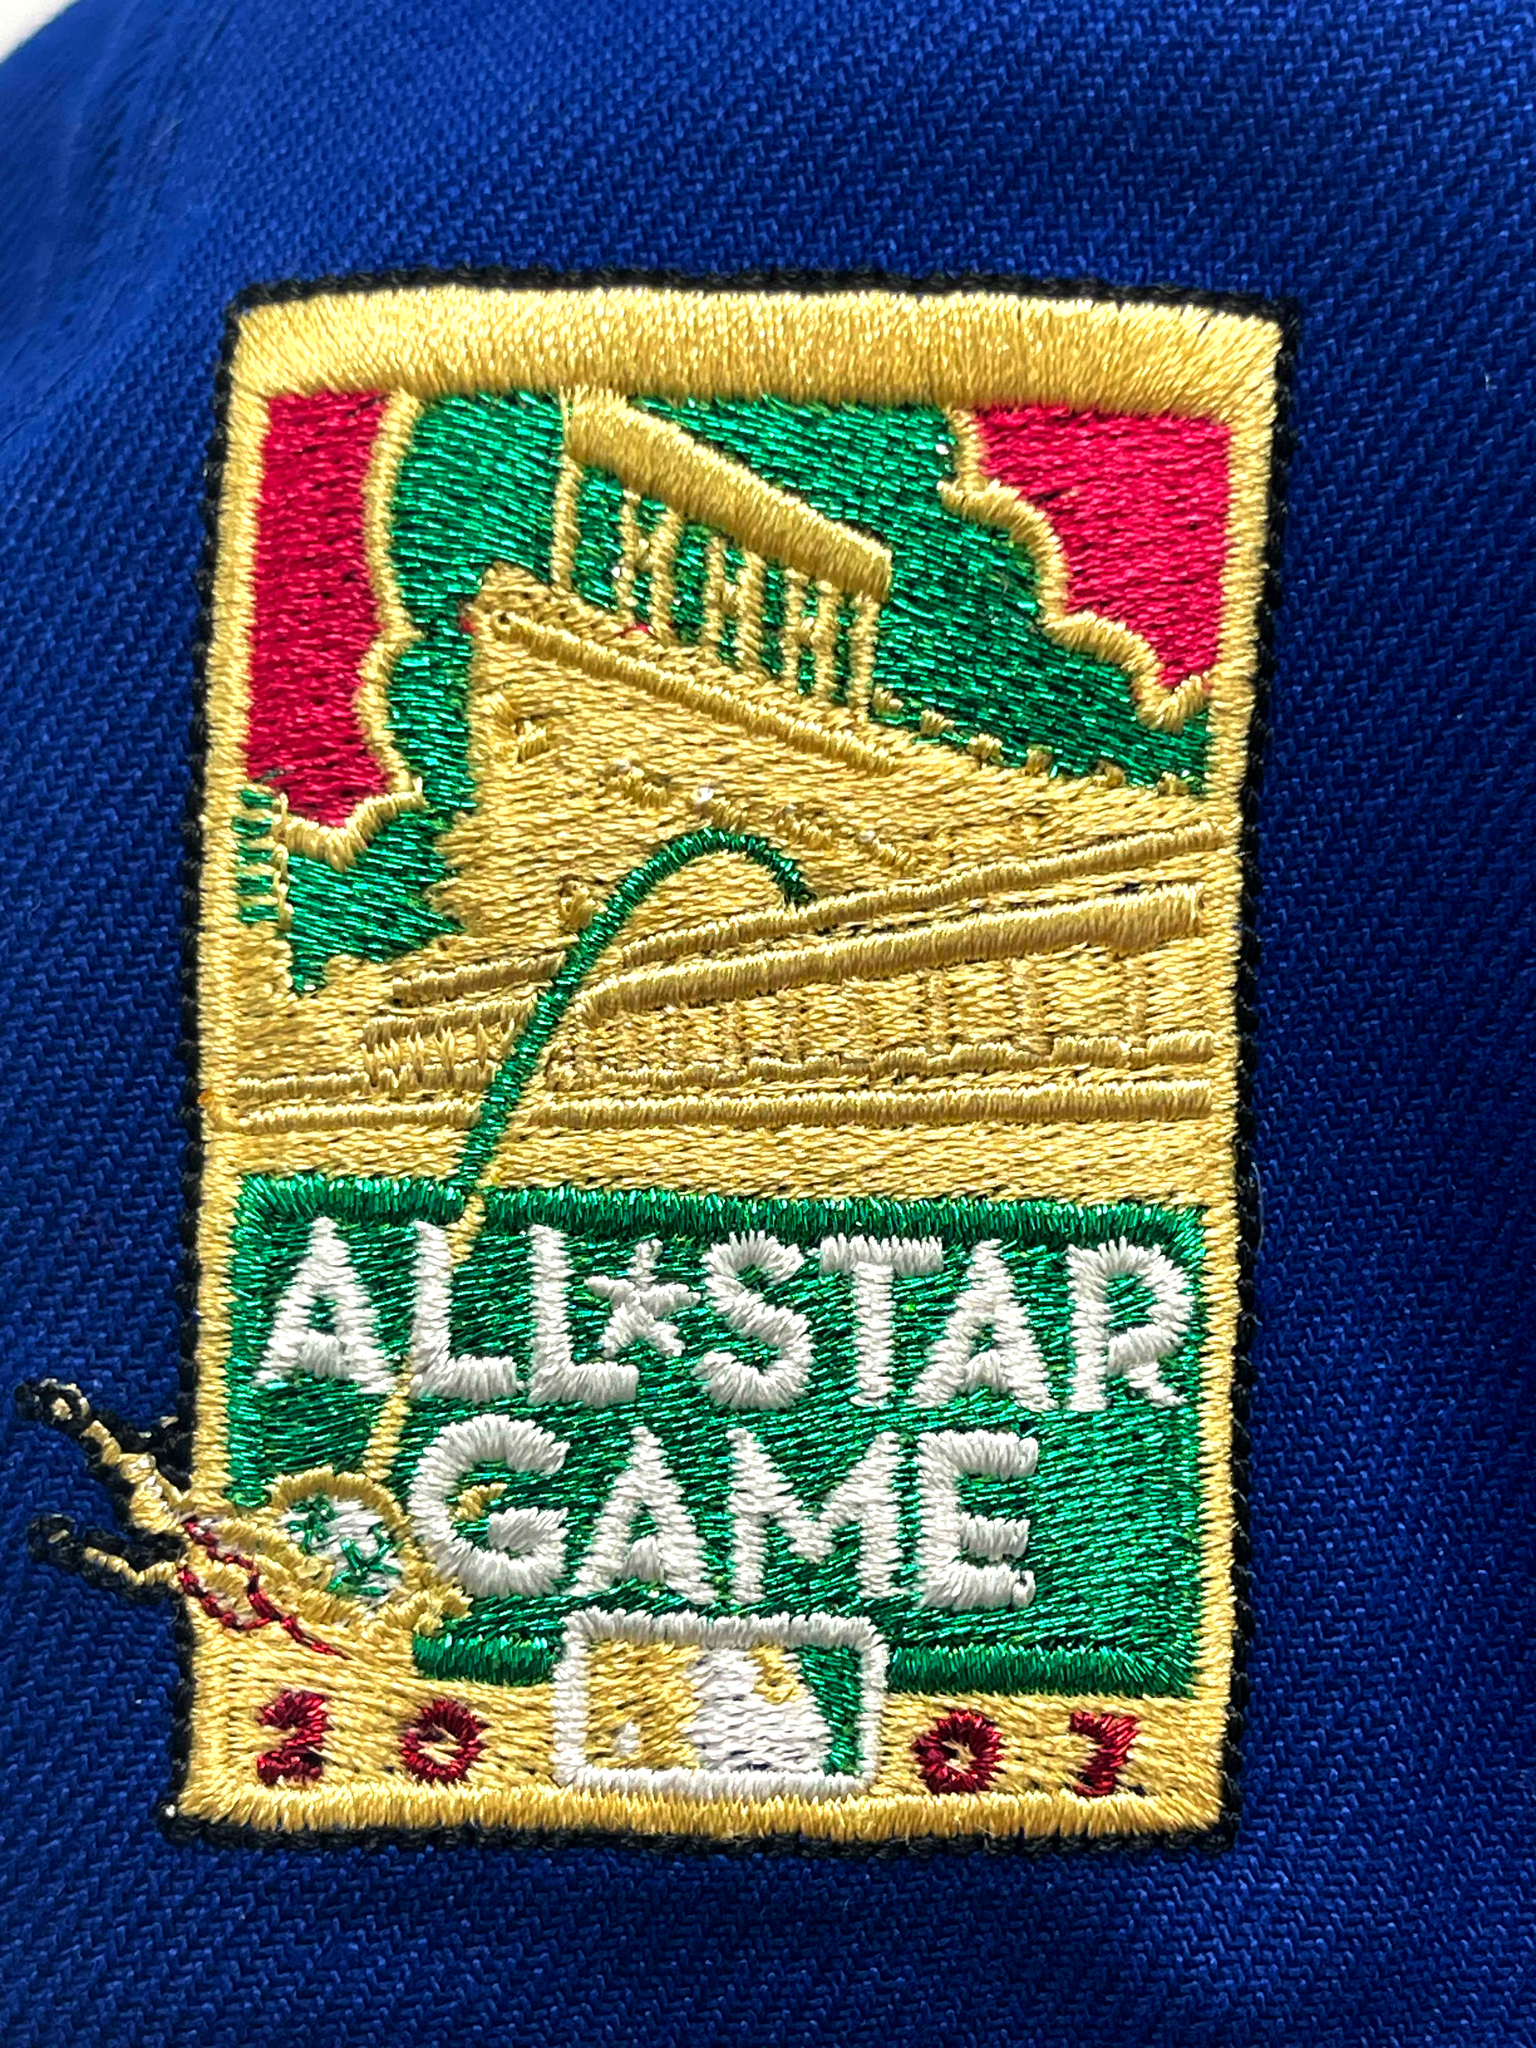 San Francisco Giants 2007 All-Star Game Patch